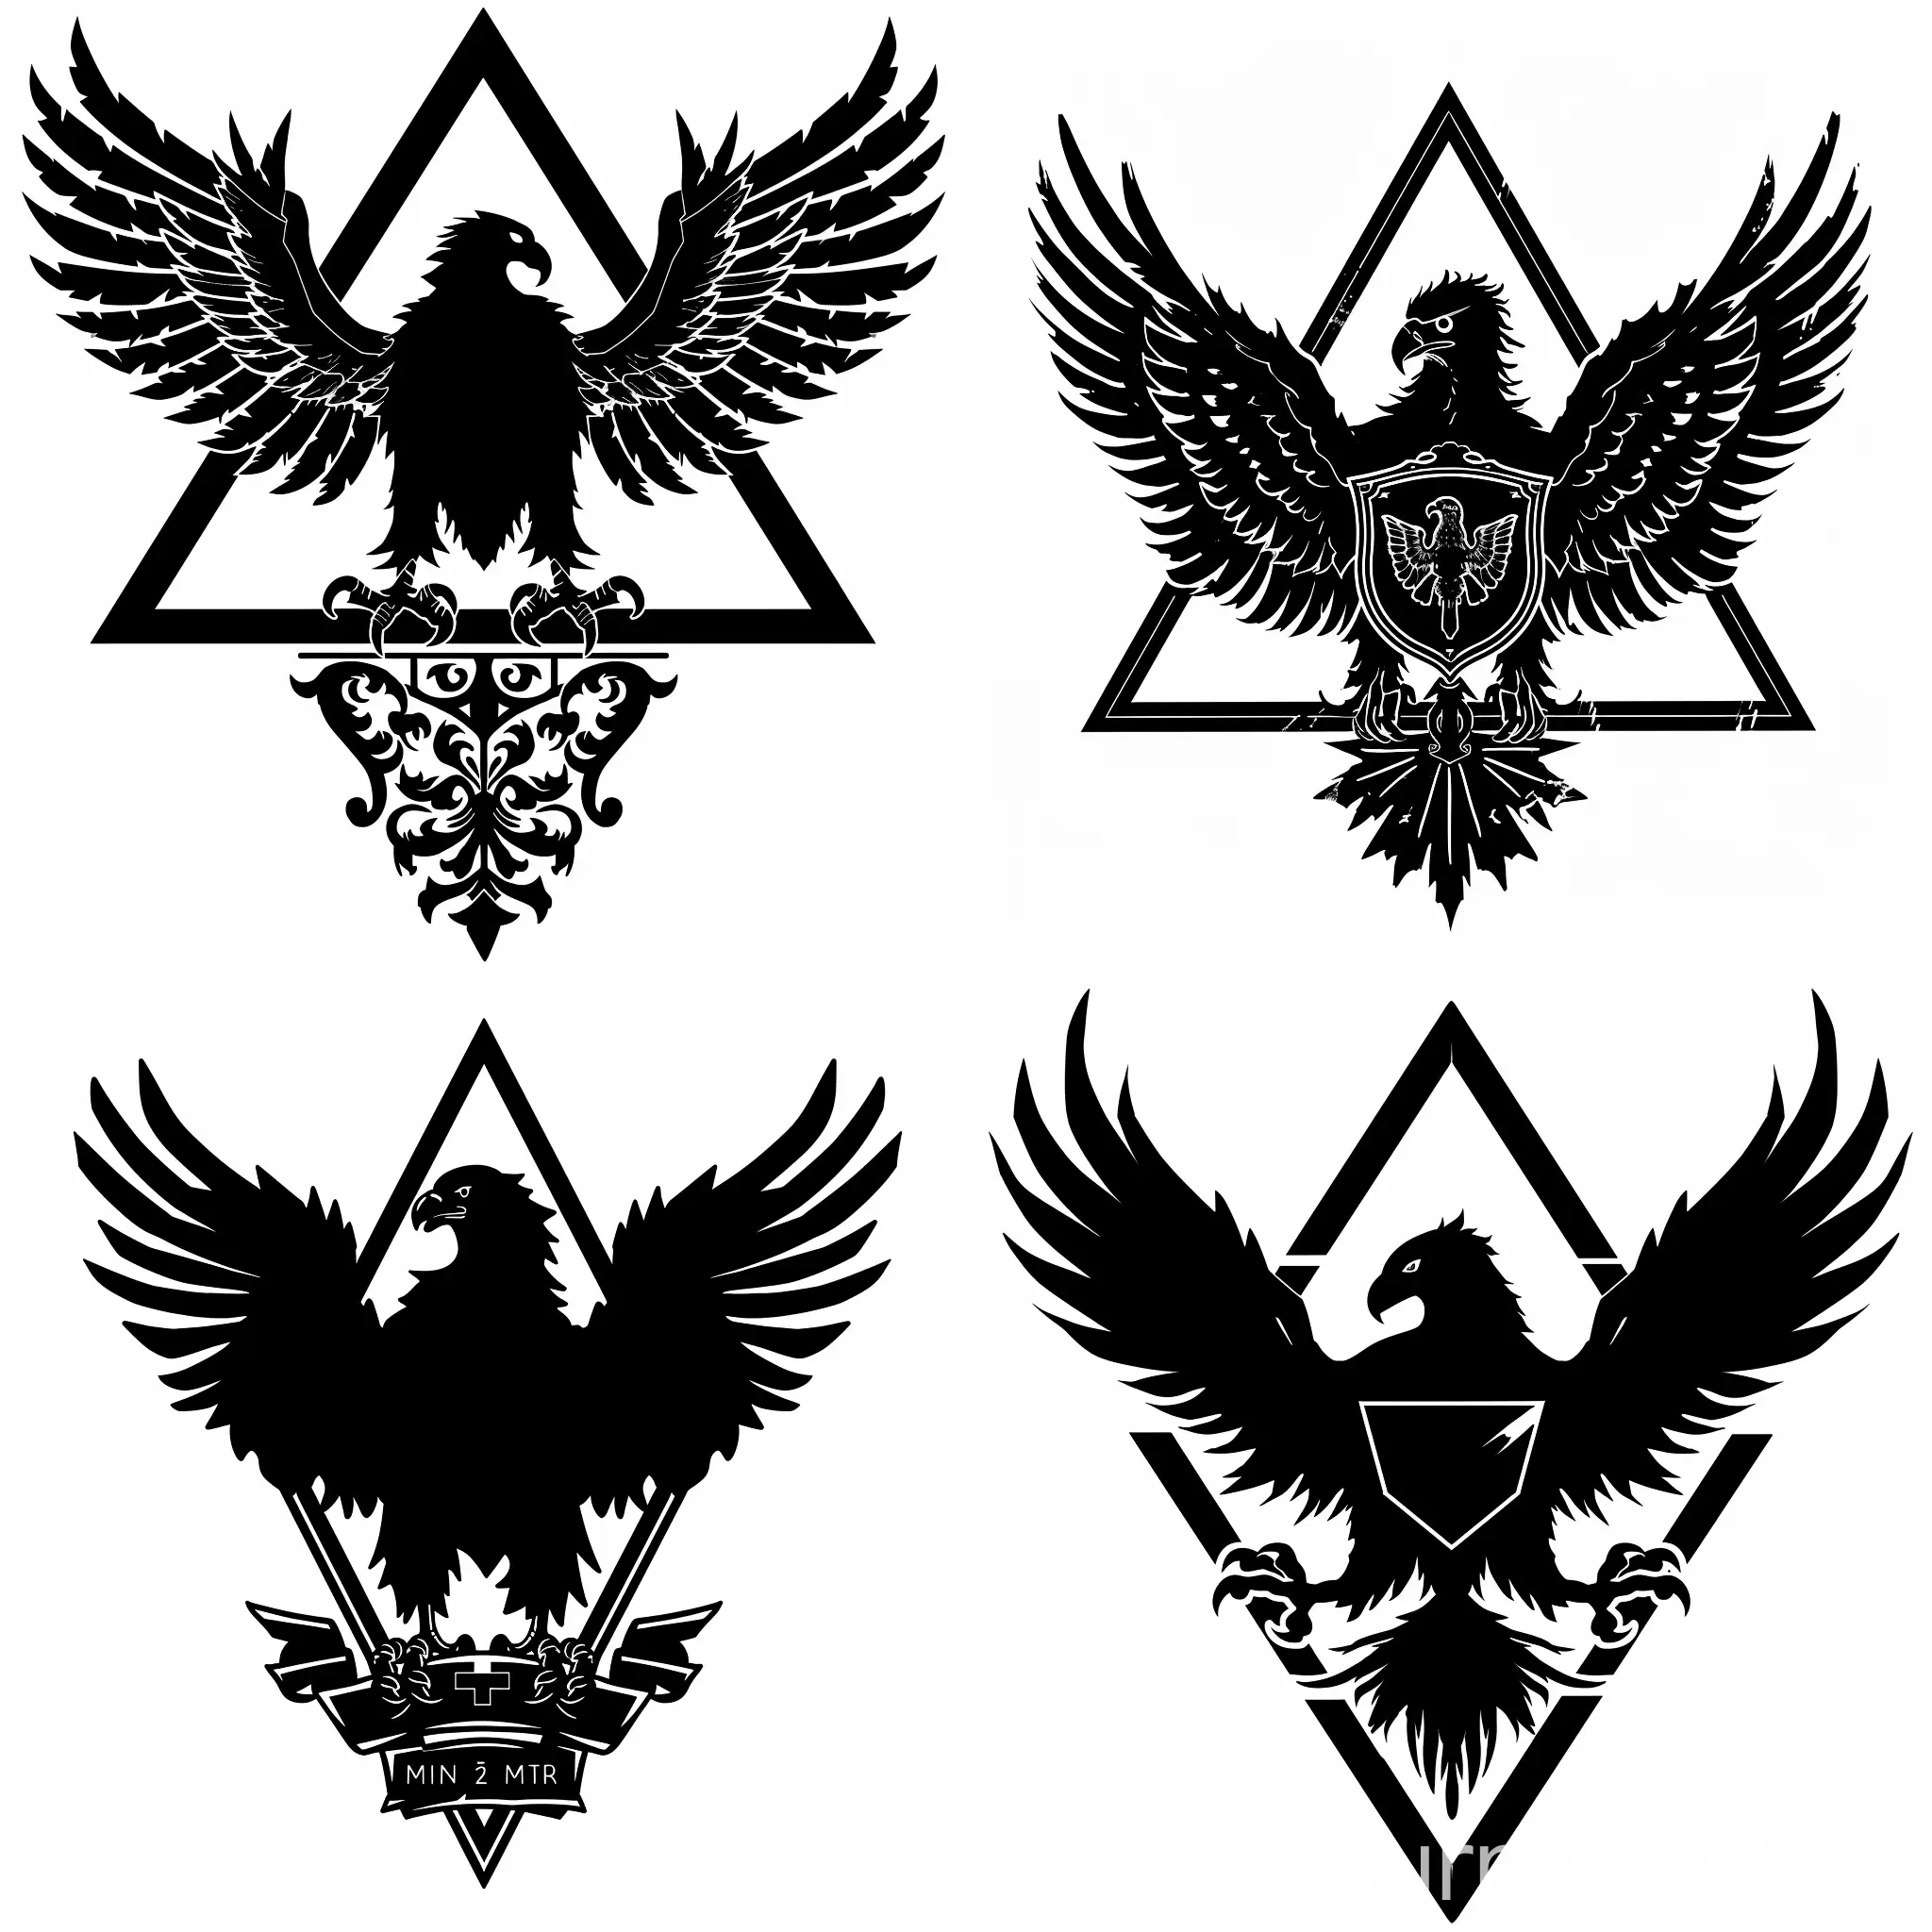 Majestic-Black-Eagle-Coat-of-Arms-Silhouette-within-SCPInspired-Triangle